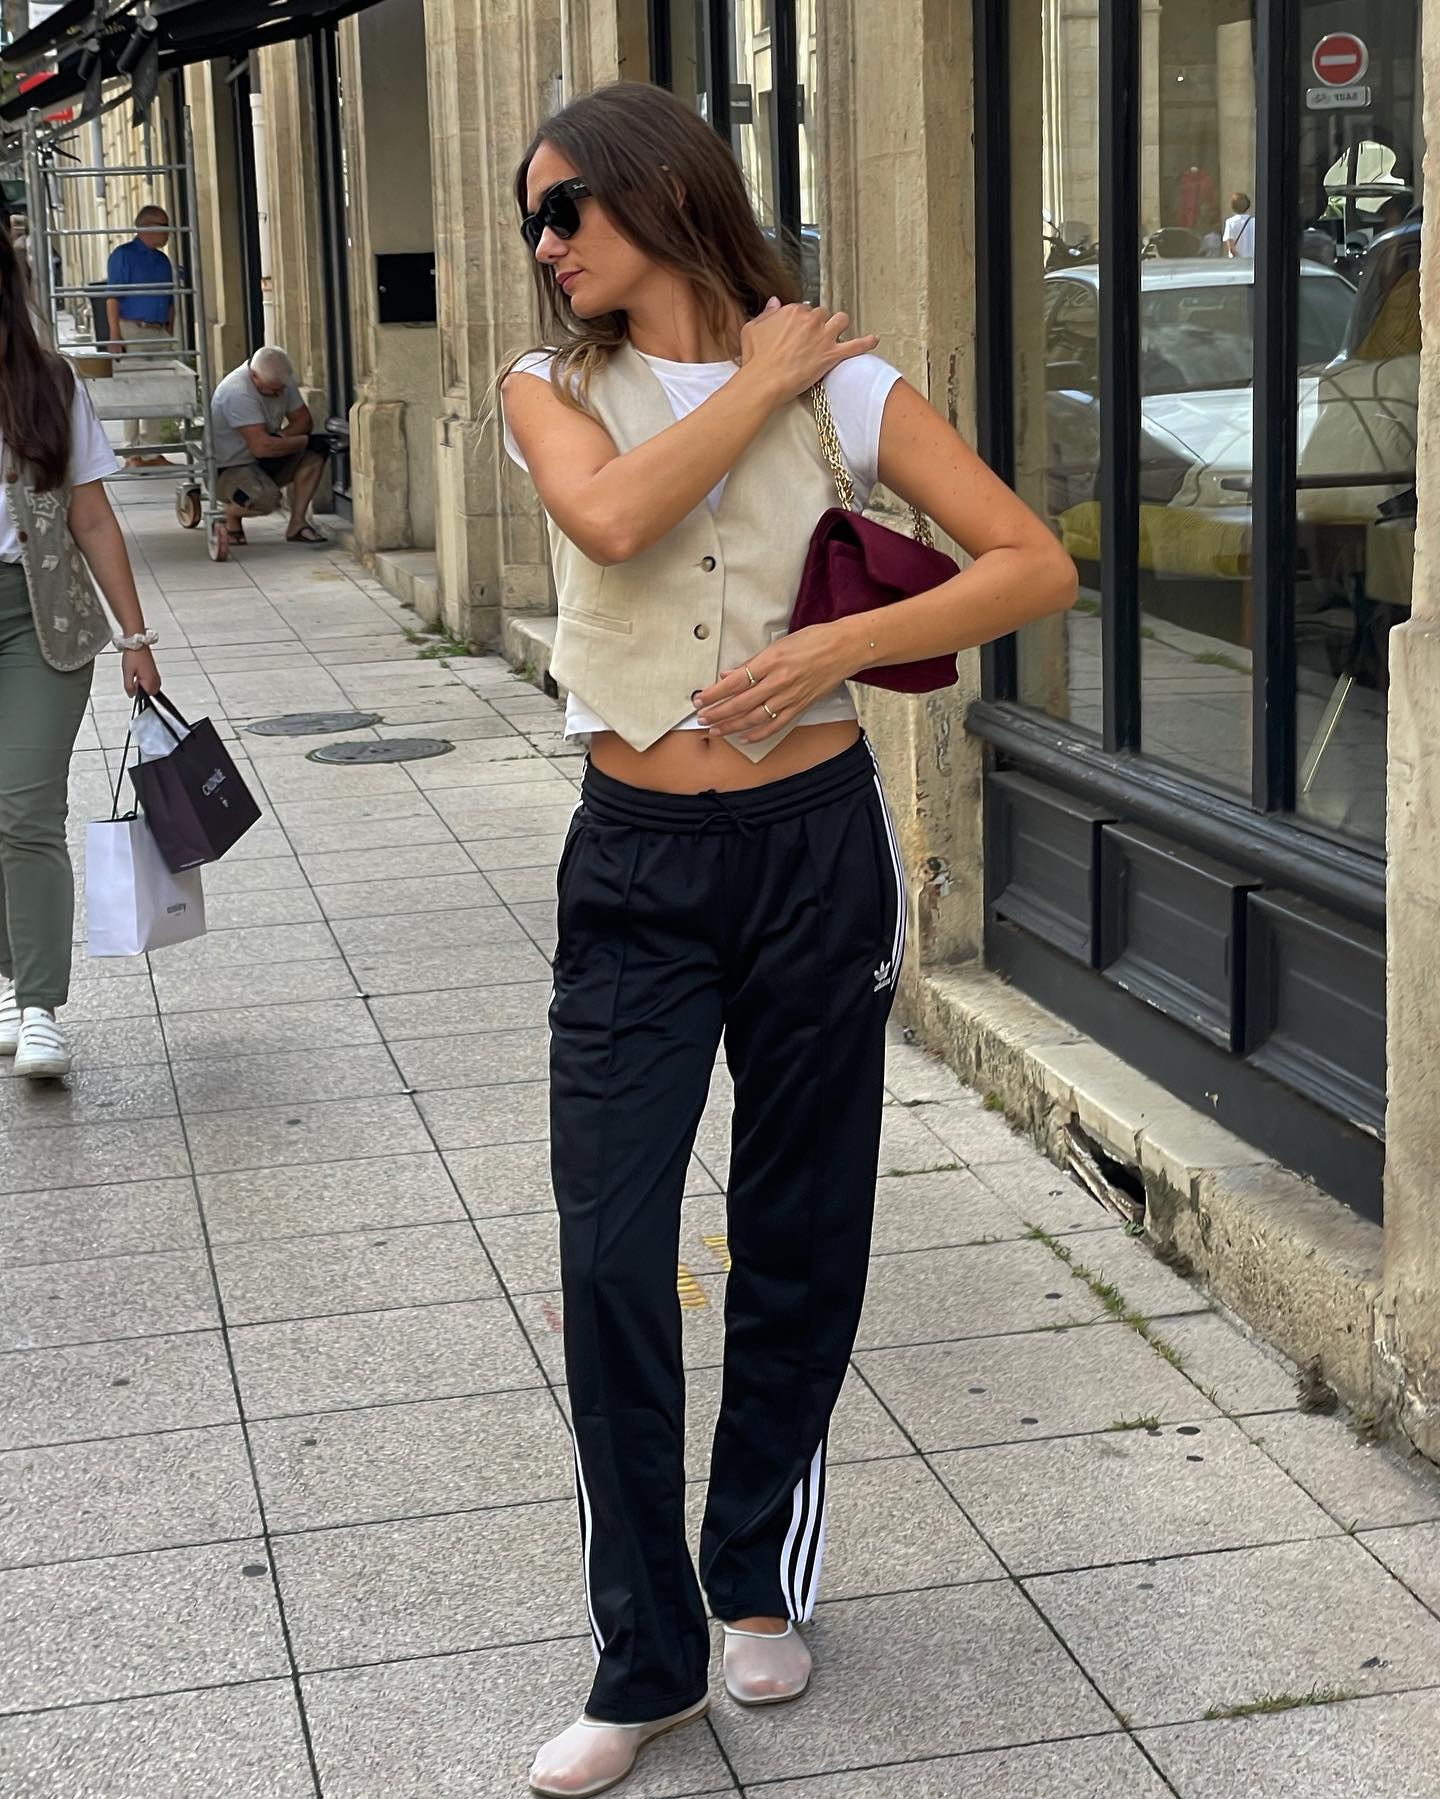 French style influencer Anne Laure Mais poses on a Paris sidewalk in a tan vest, Adidas track pants, and mesh ballet flats